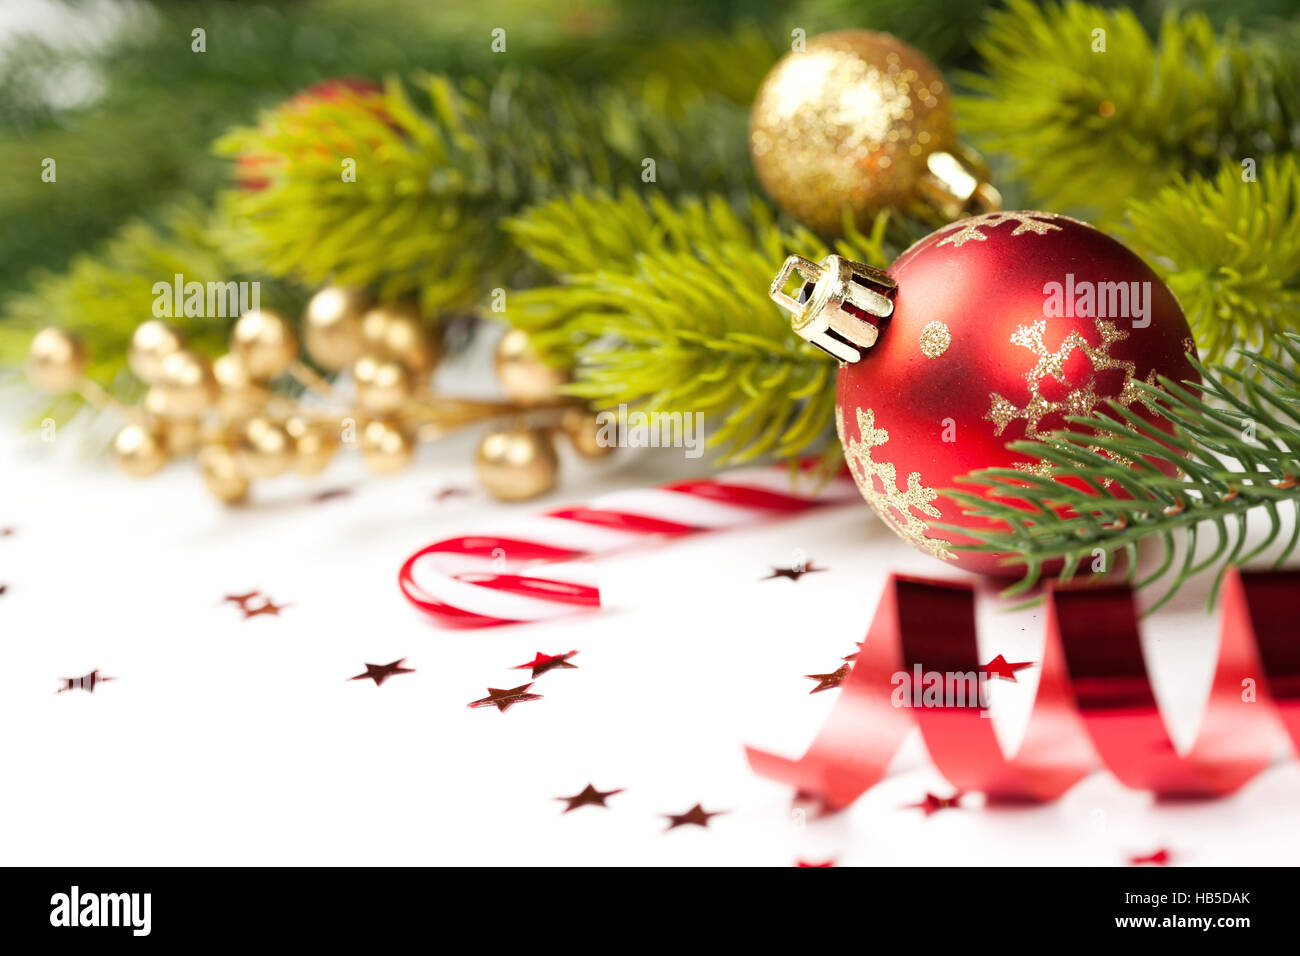 Christmas ball and other decoration on tree Stock Photo